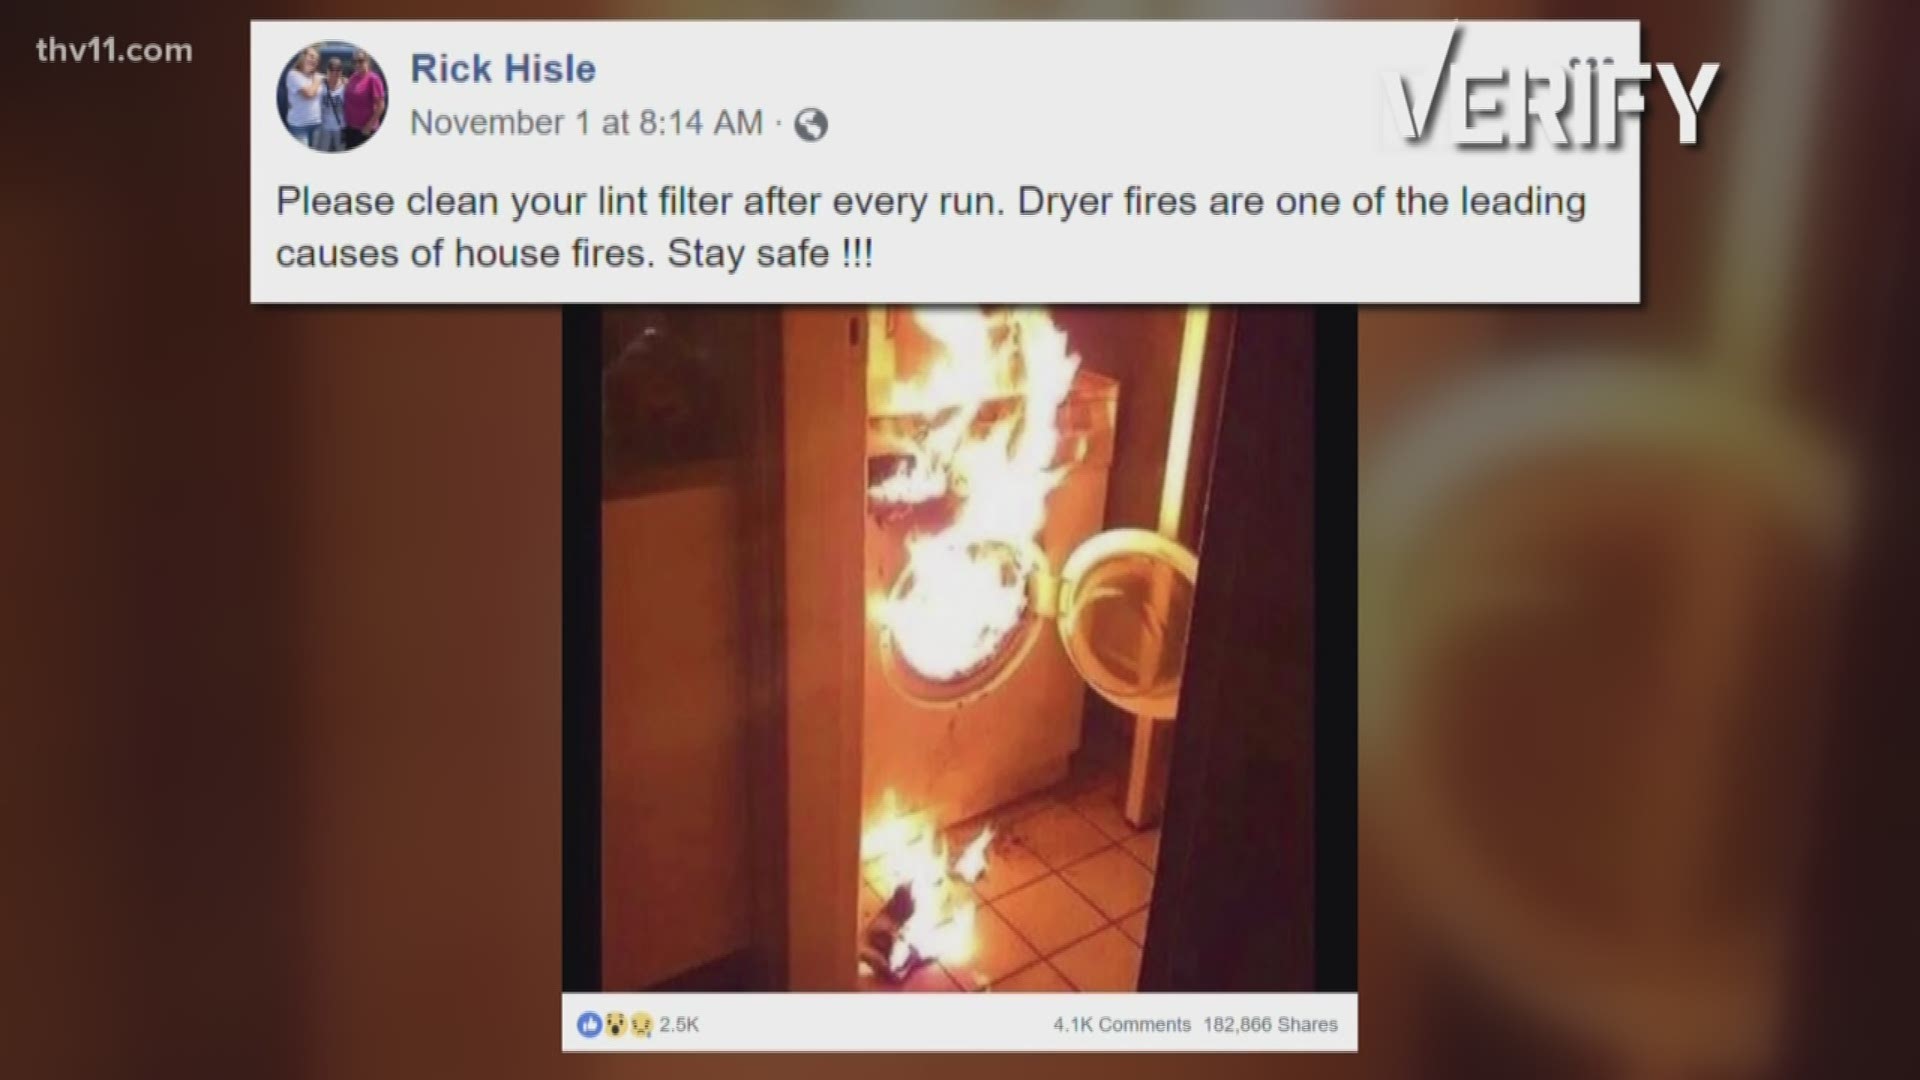 Verify ' Are dryer fires a leading cause of house fires?